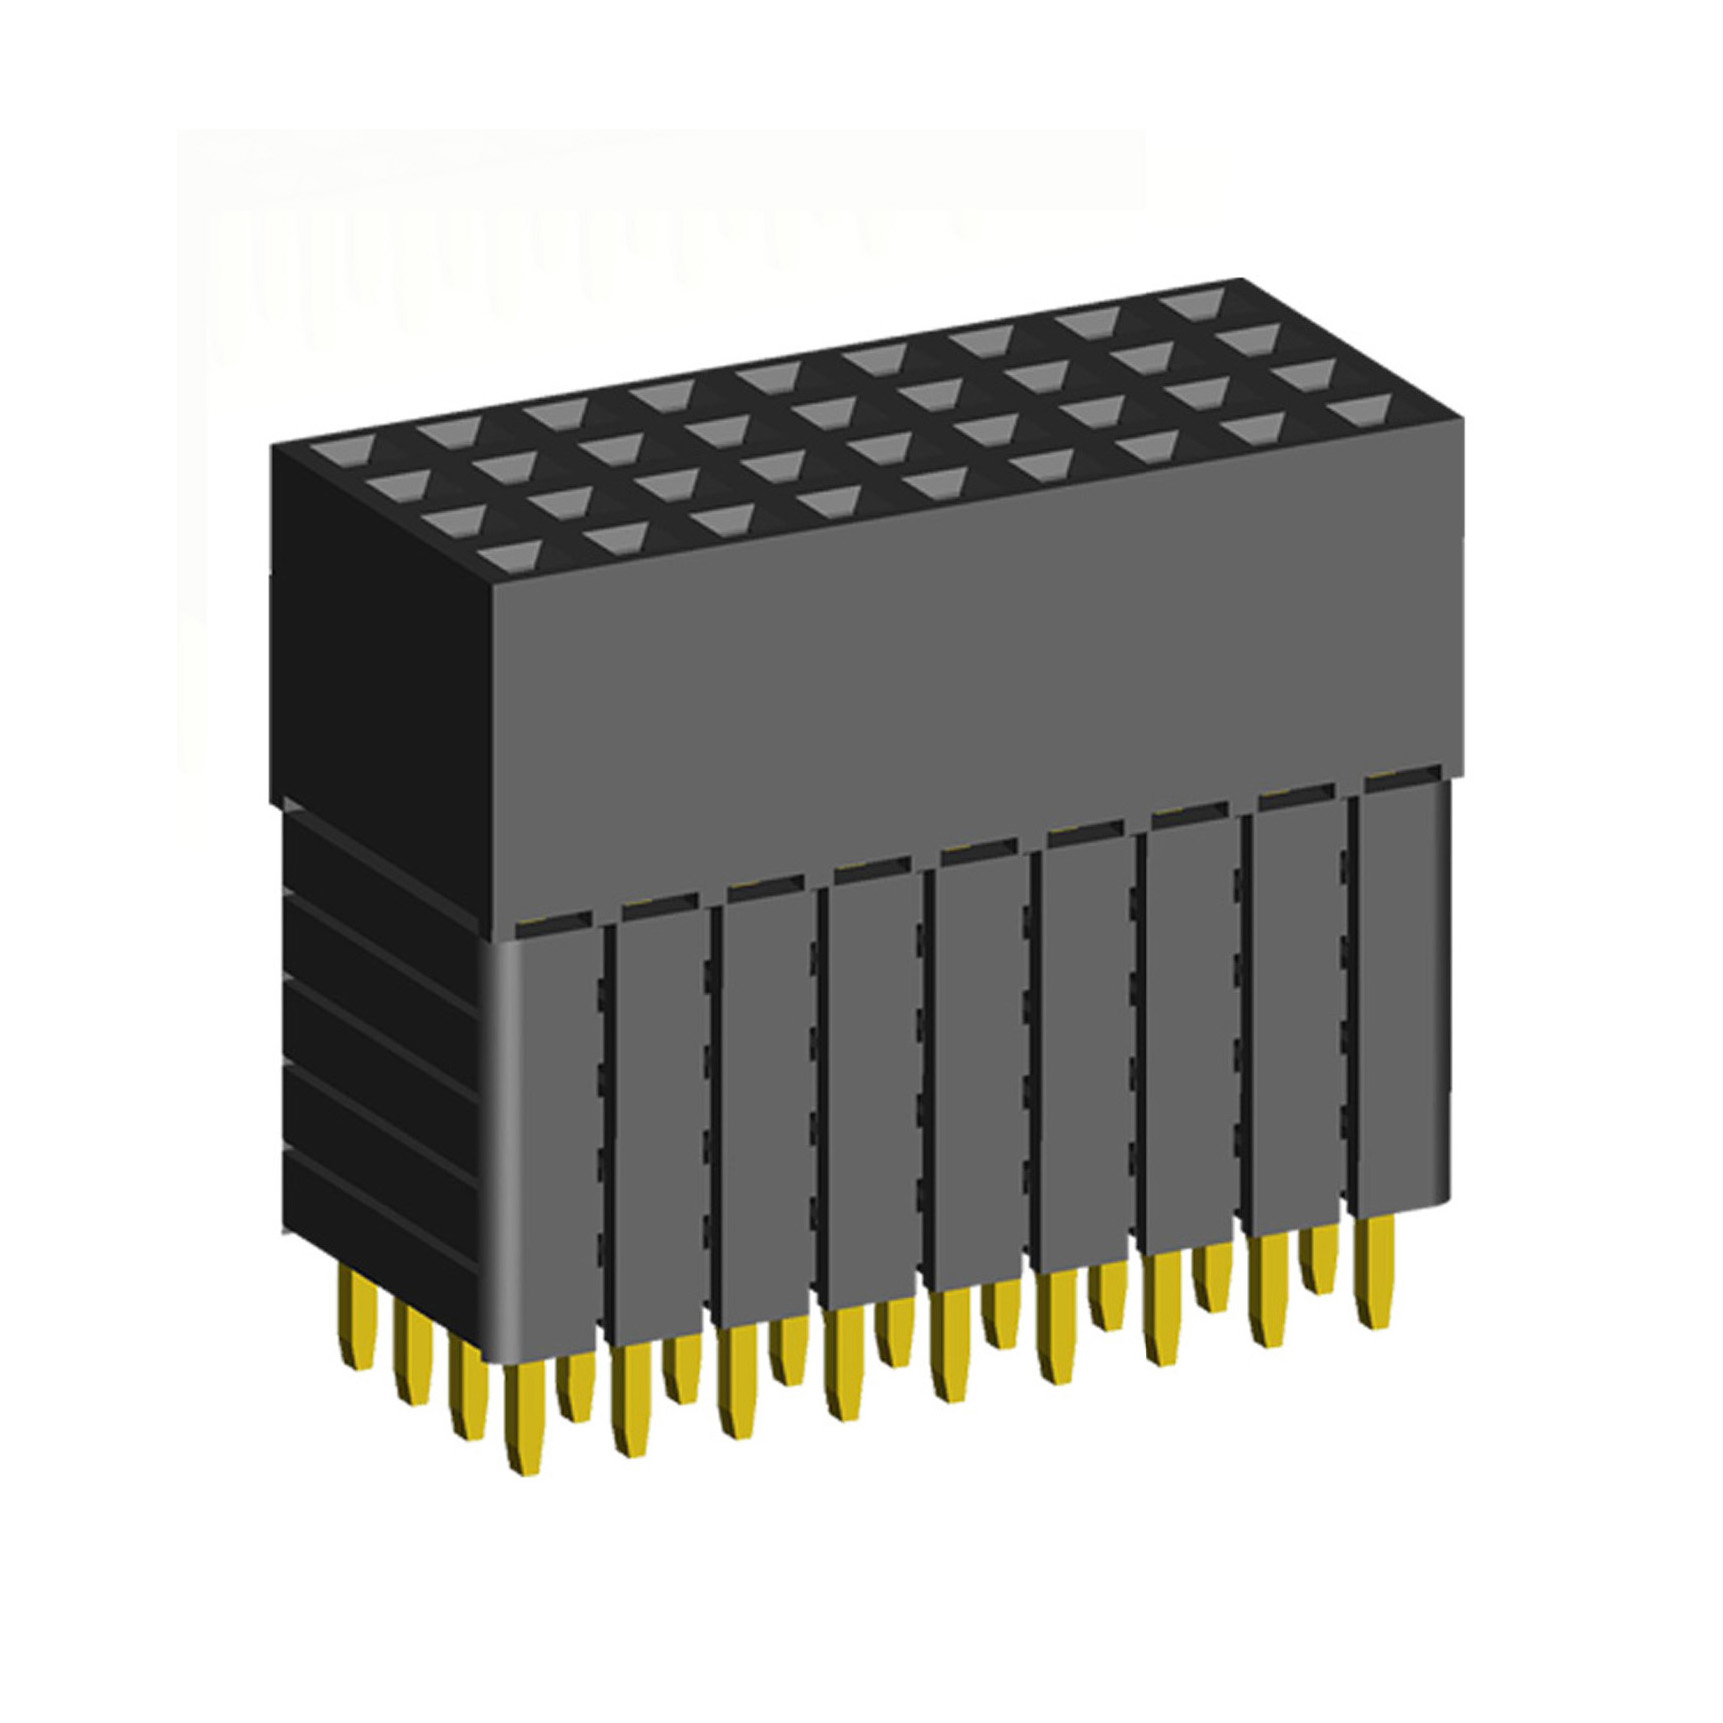 1999SDI-XXXG-5A series, four-row sockets straight to the Board for mounting holes, pitch 2,0x2,0 mm, 4x40 pins